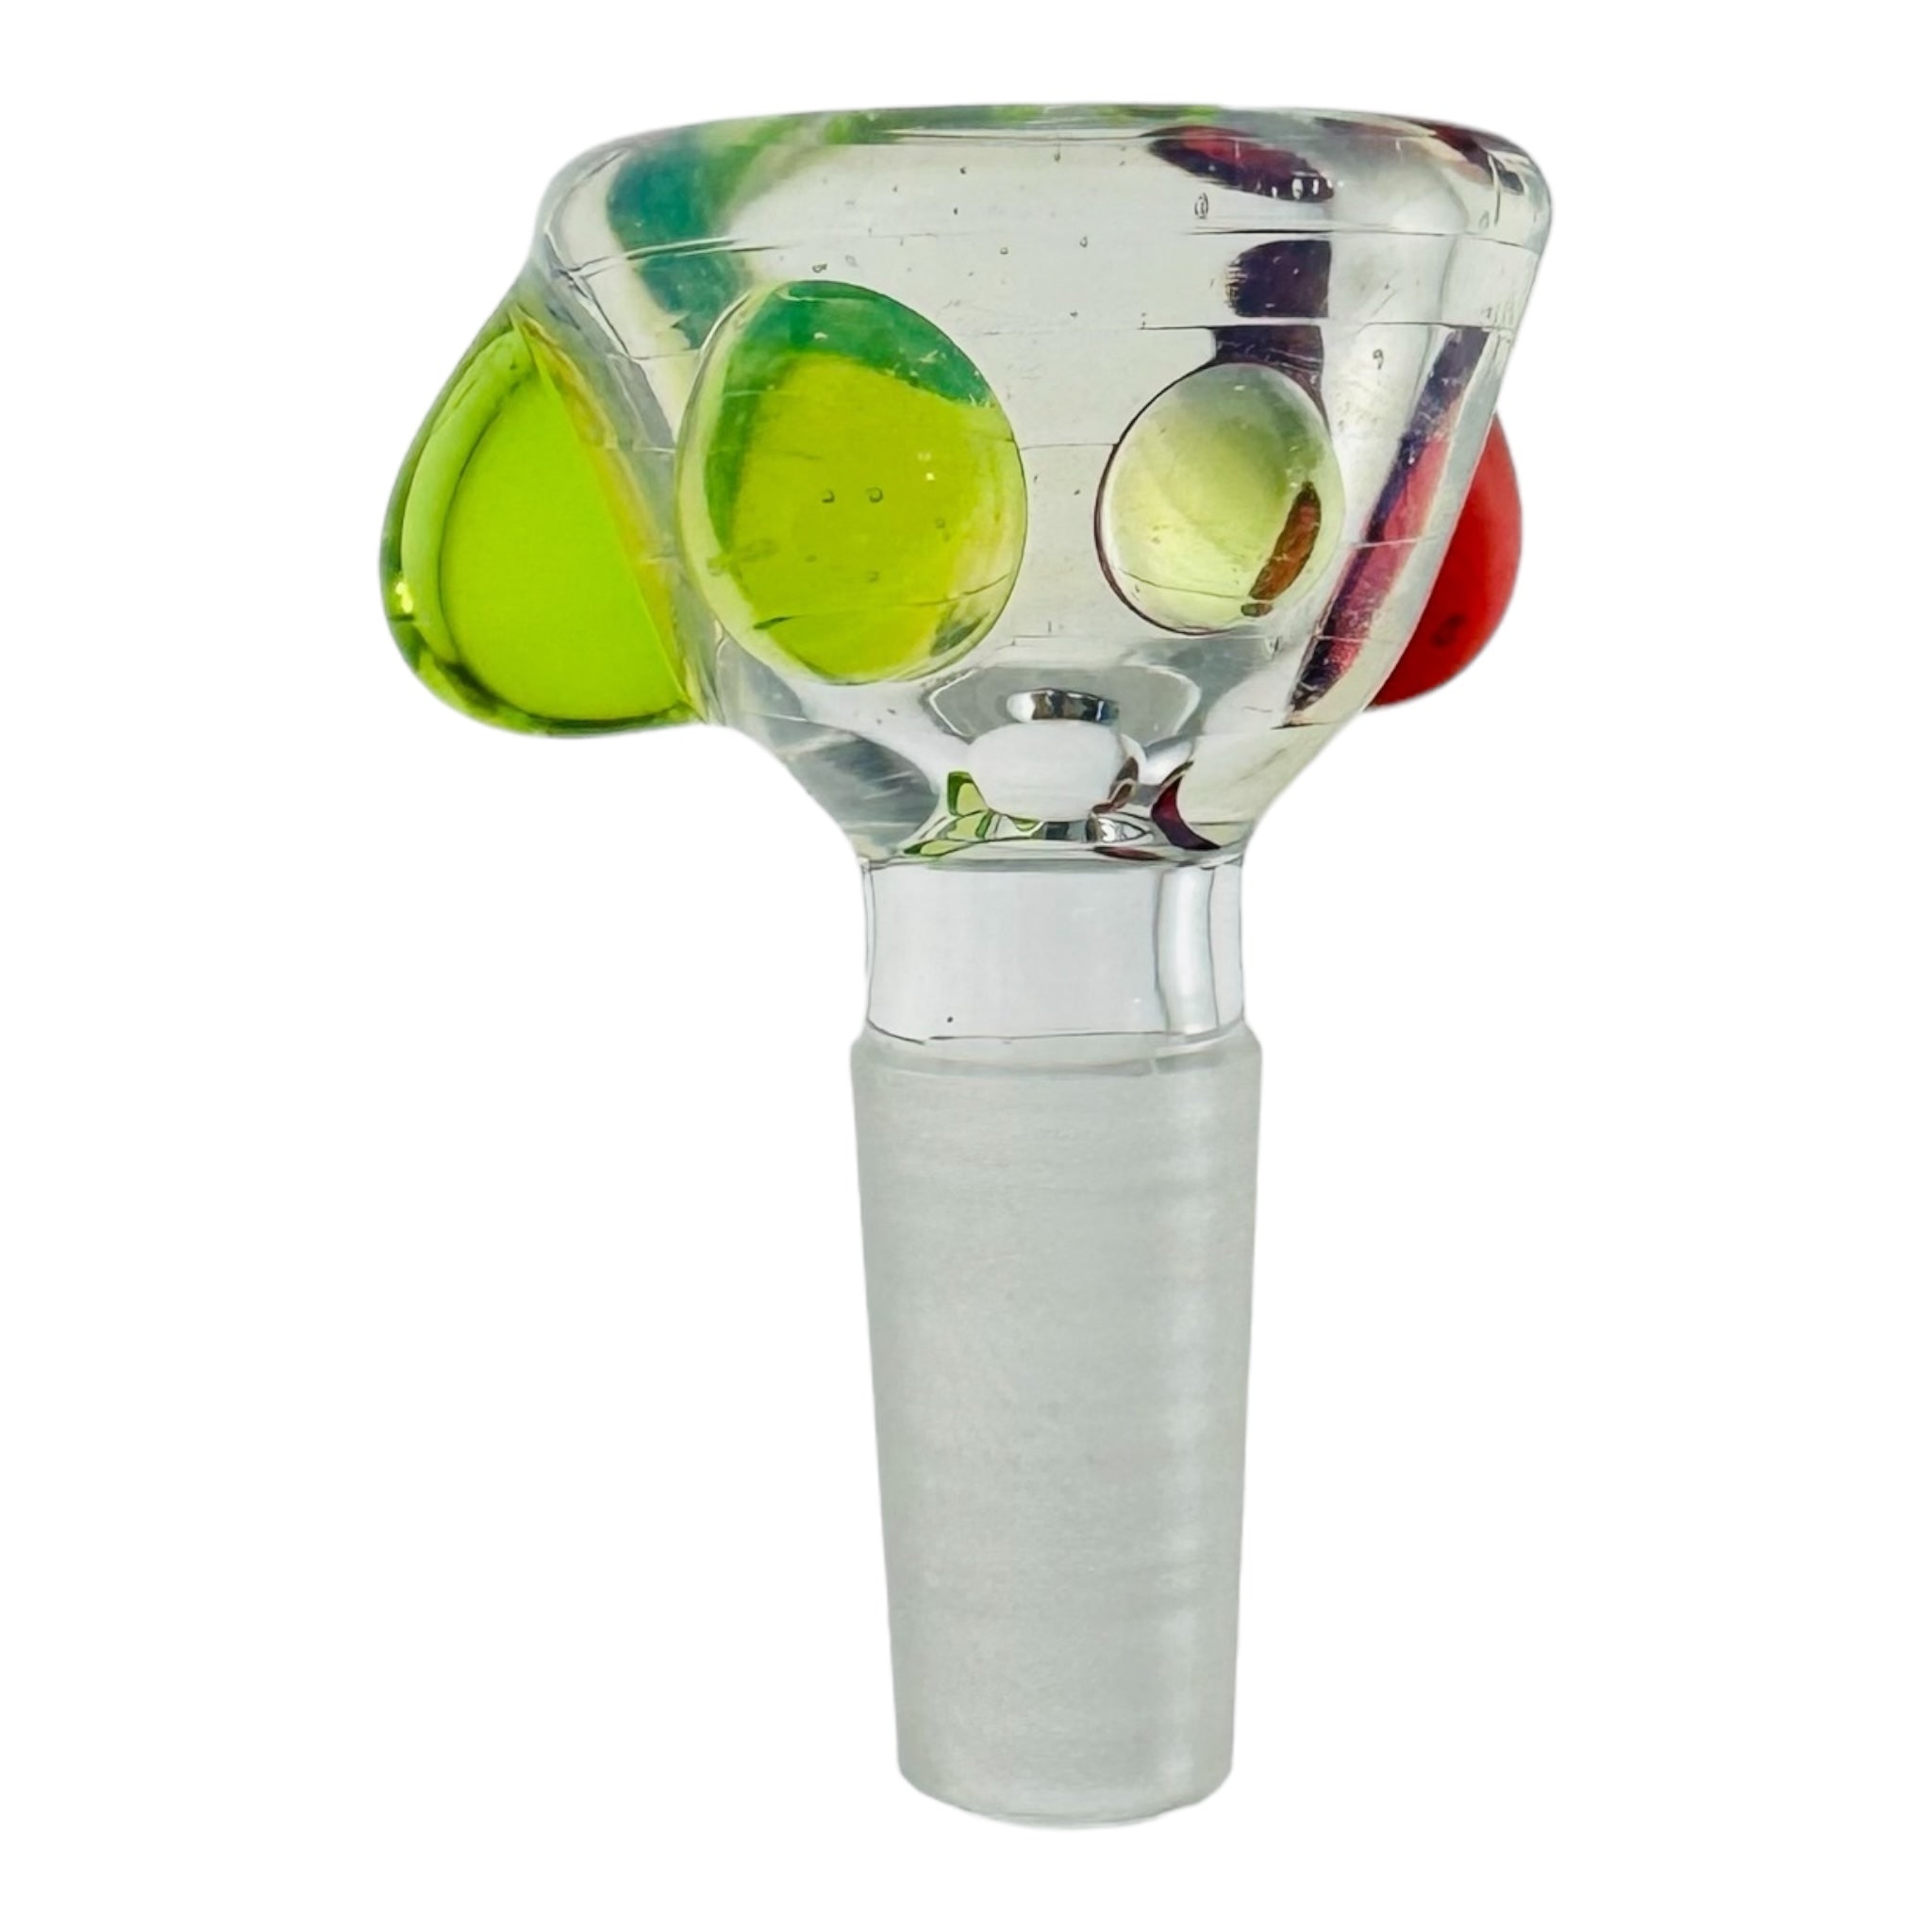 Arko Glass 10mm Bong Bowl For Weed Clear Mystic Bowl With Green And Red Dots